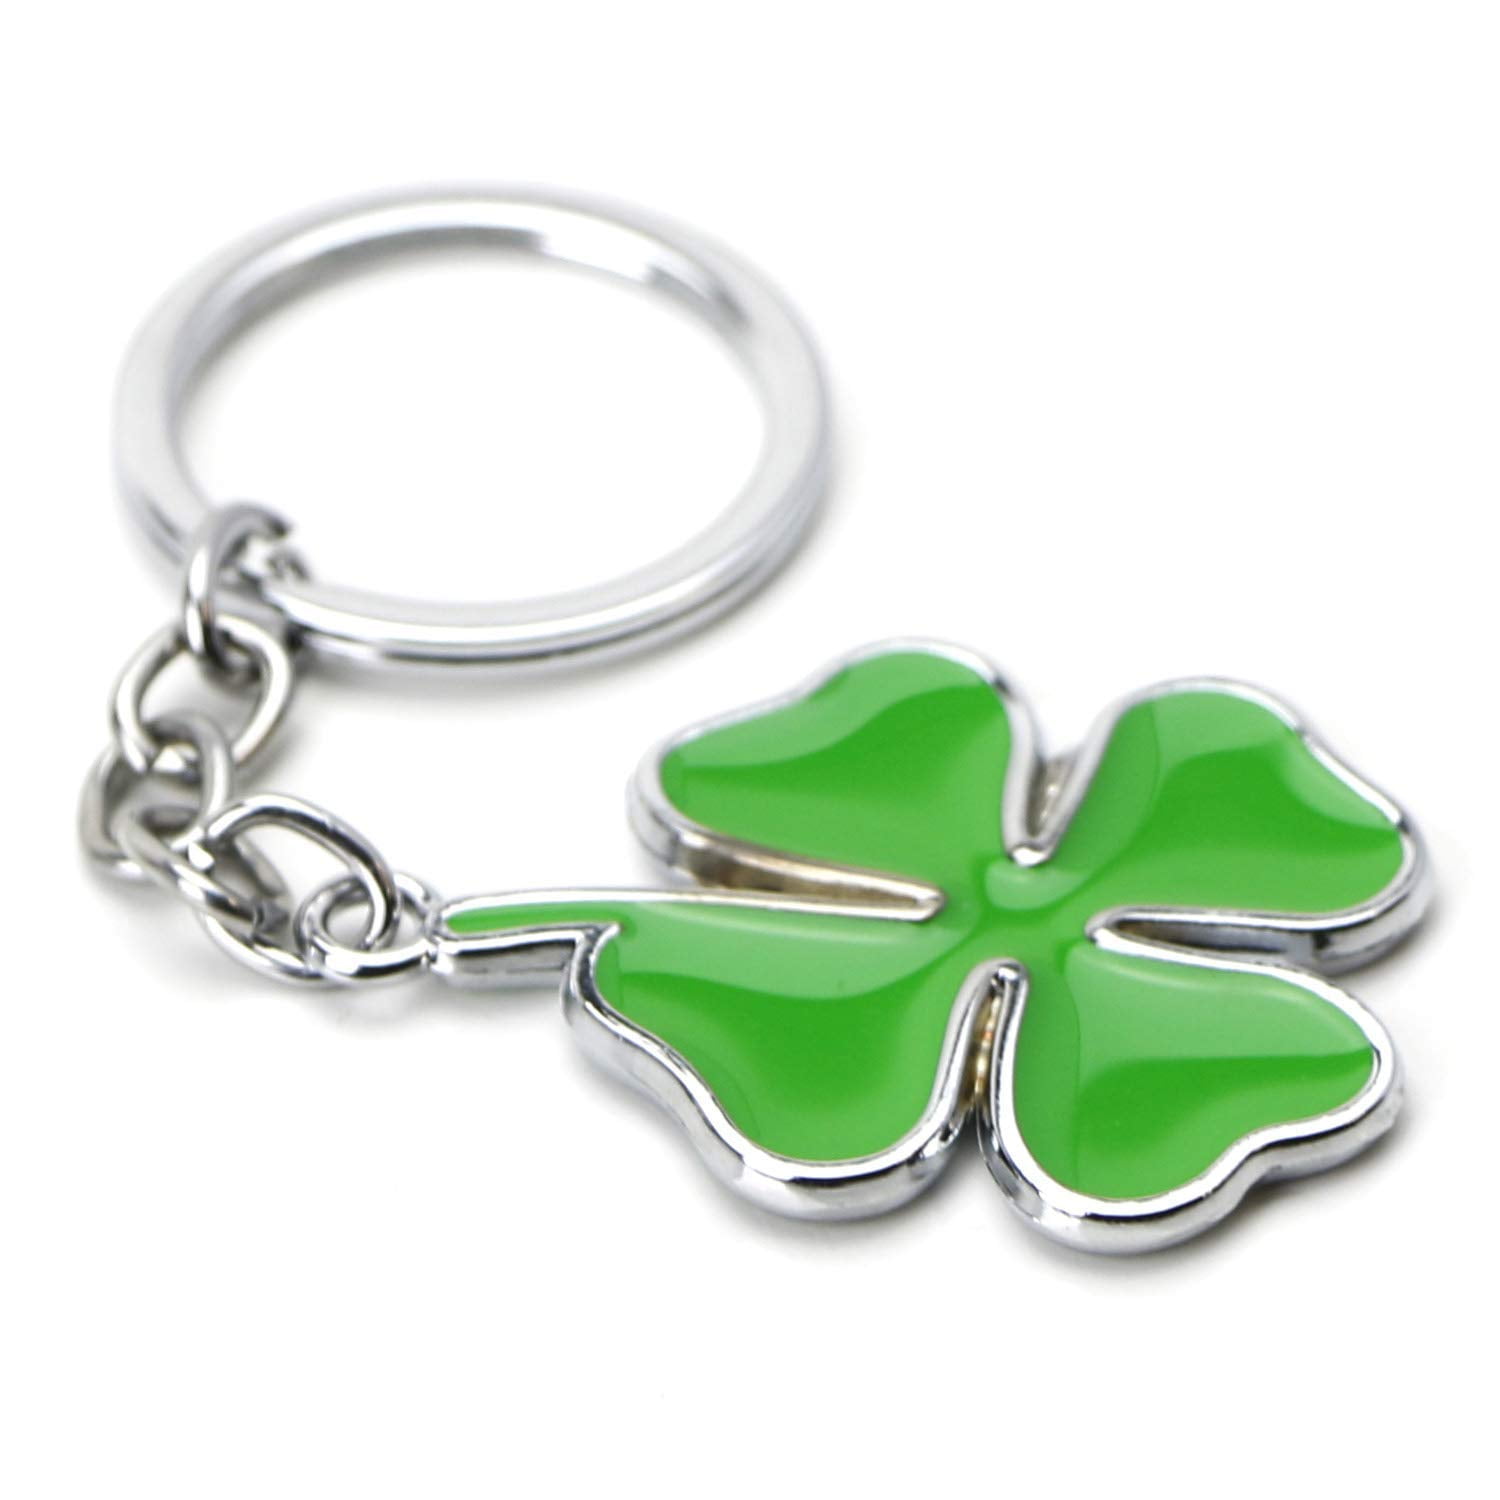 Fashion Lucky Four Leaf Clovers Charm Pendant Keyring Key Ring Chain Gift 